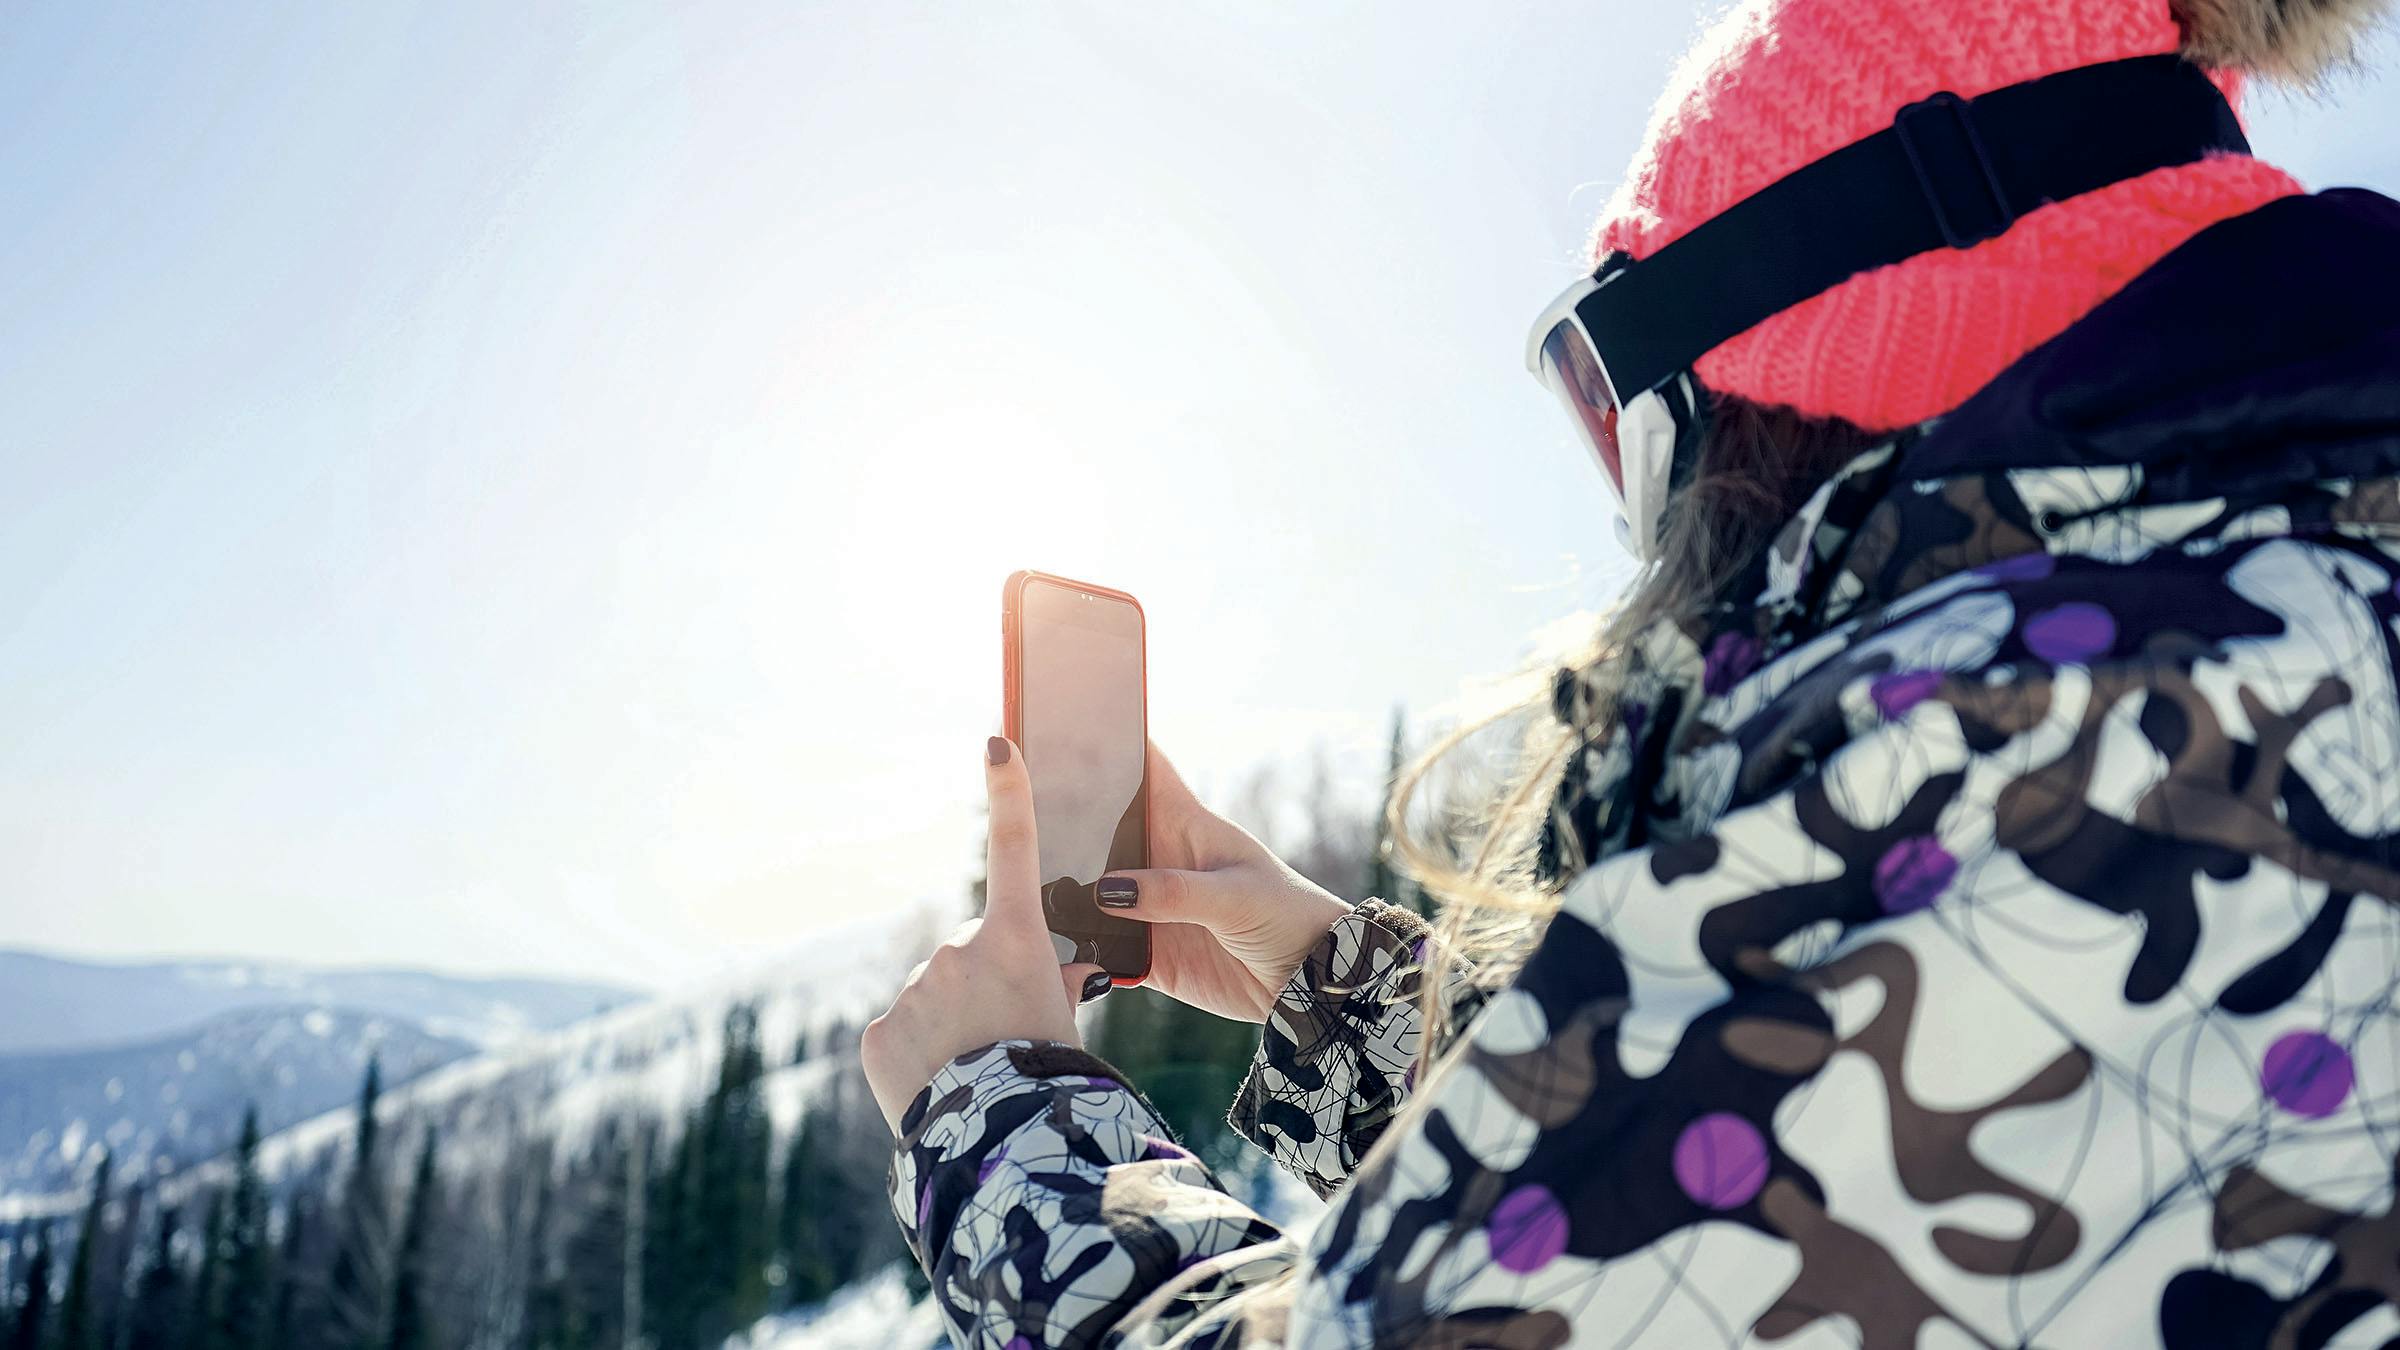 Woman in ski gear holding up phone to take a photo in the mountains